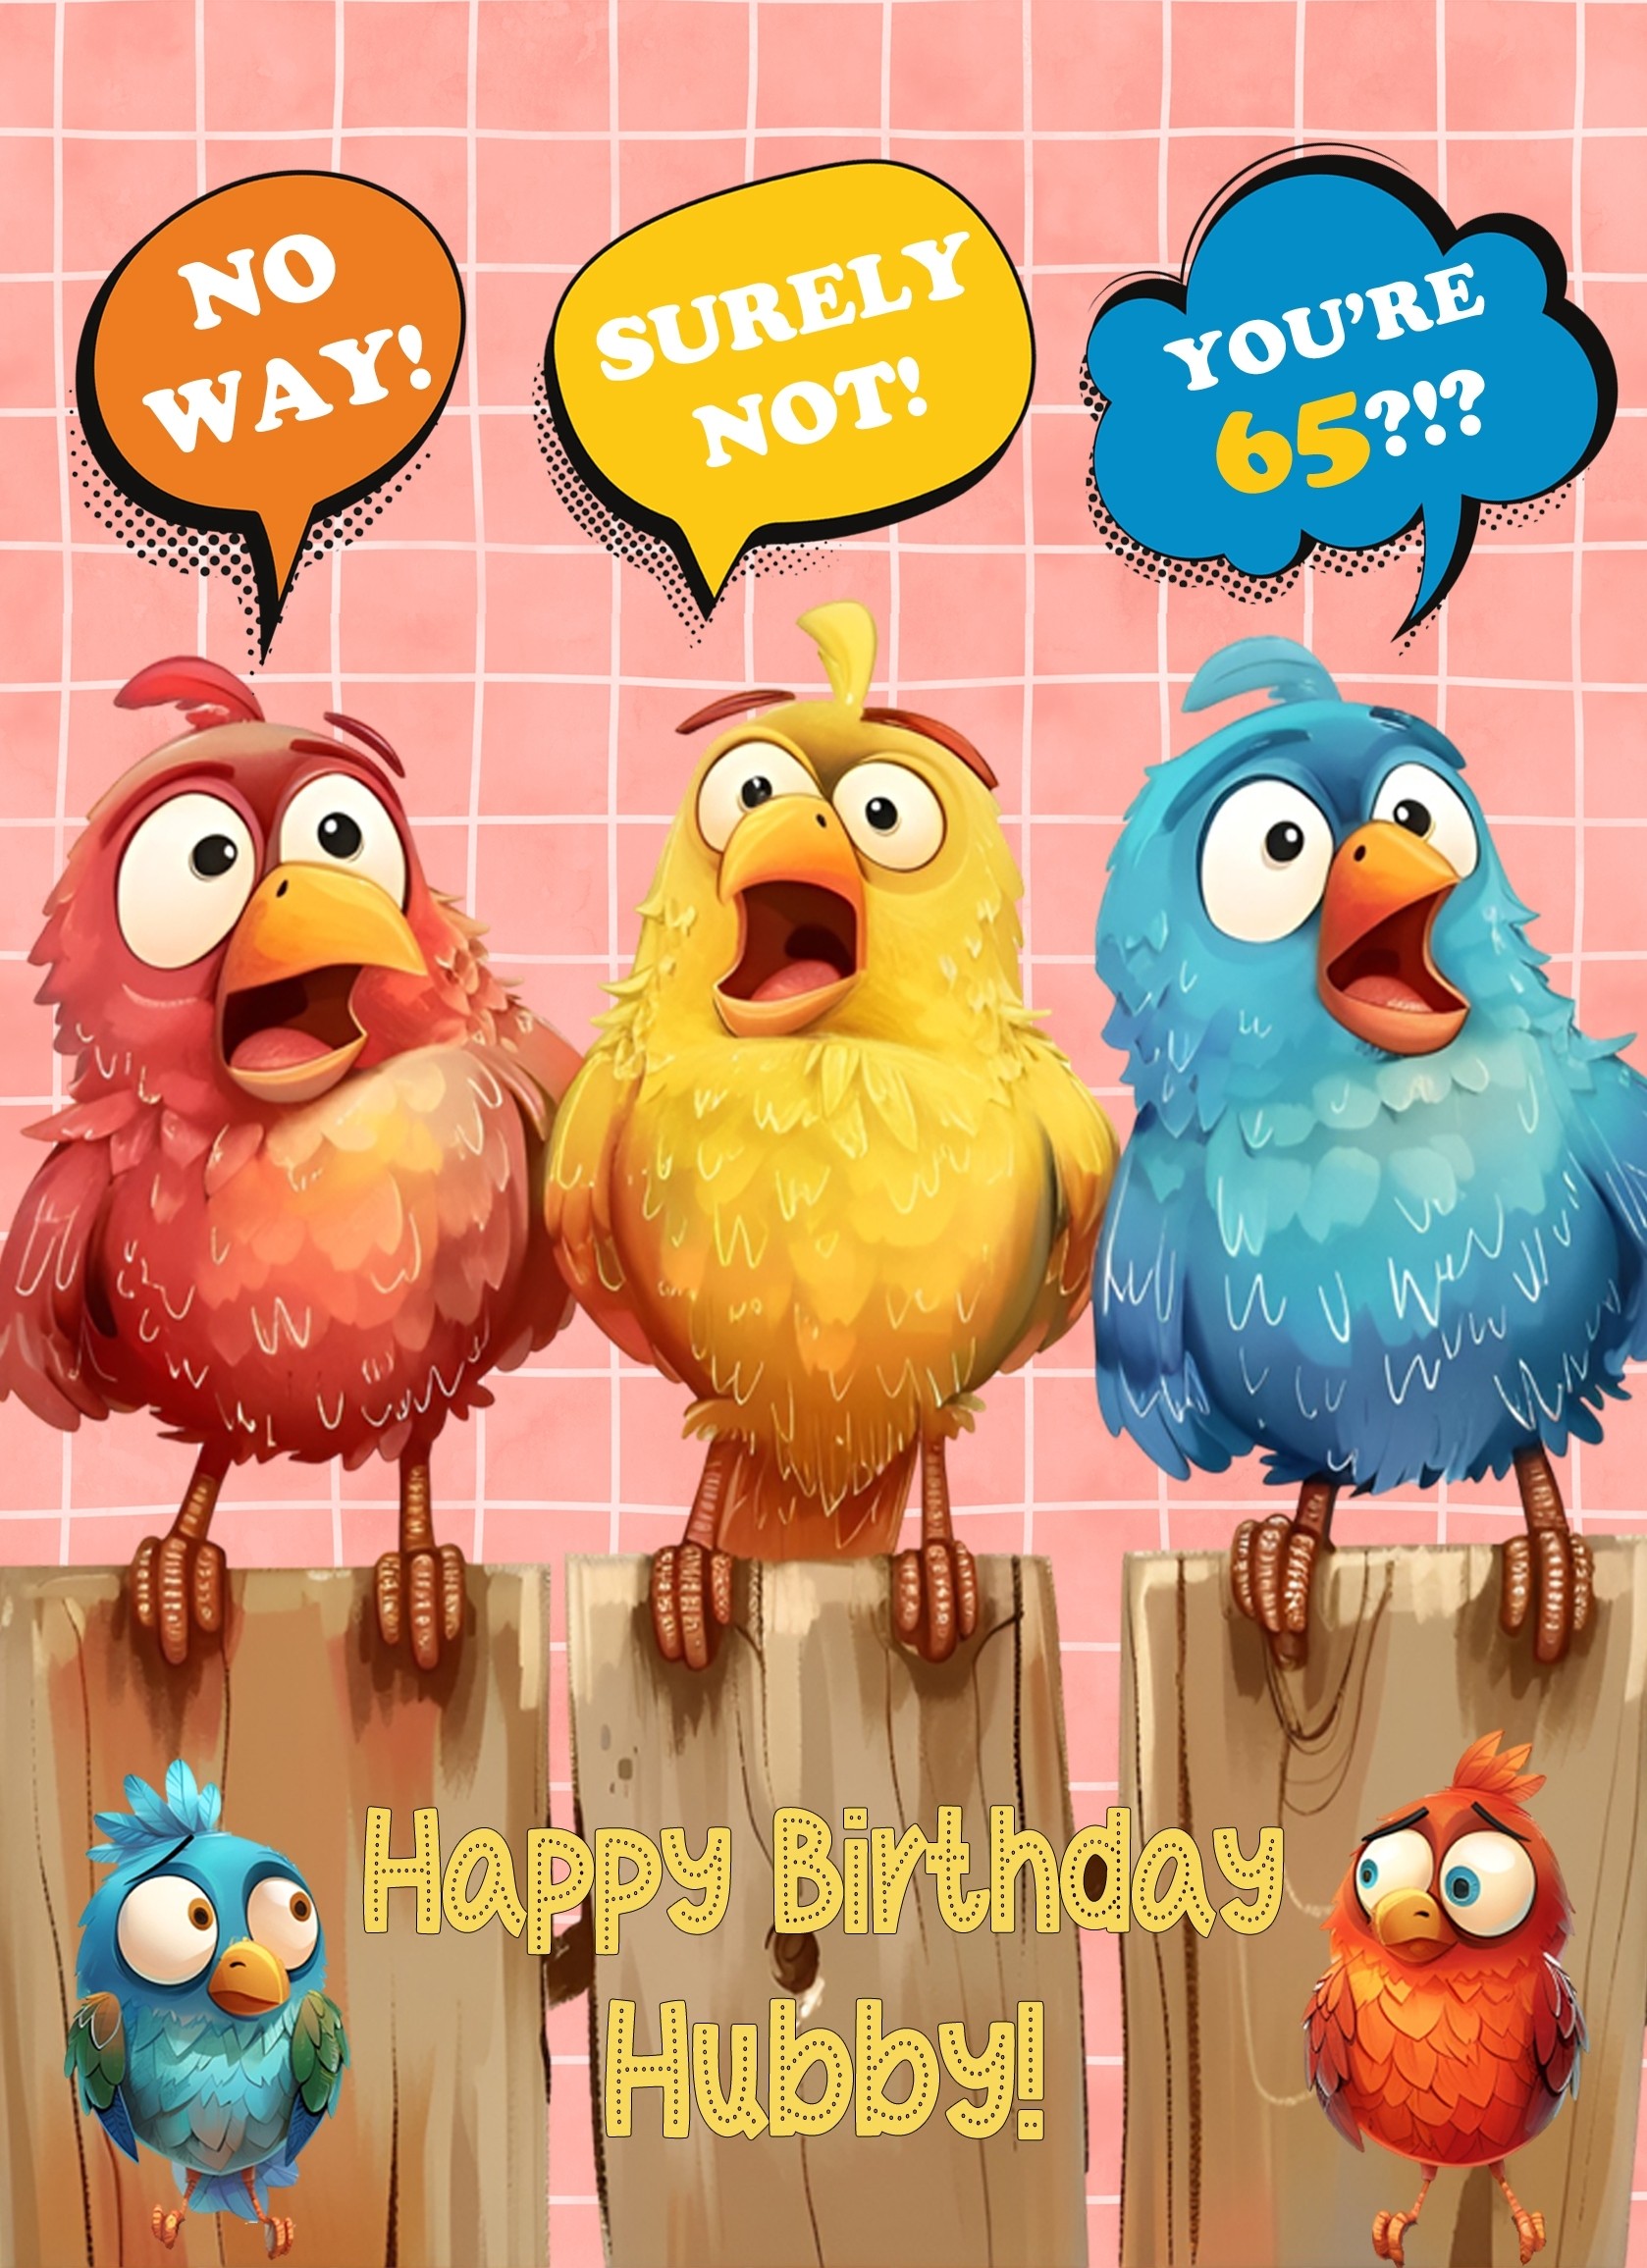 Hubby 65th Birthday Card (Funny Birds Surprised)